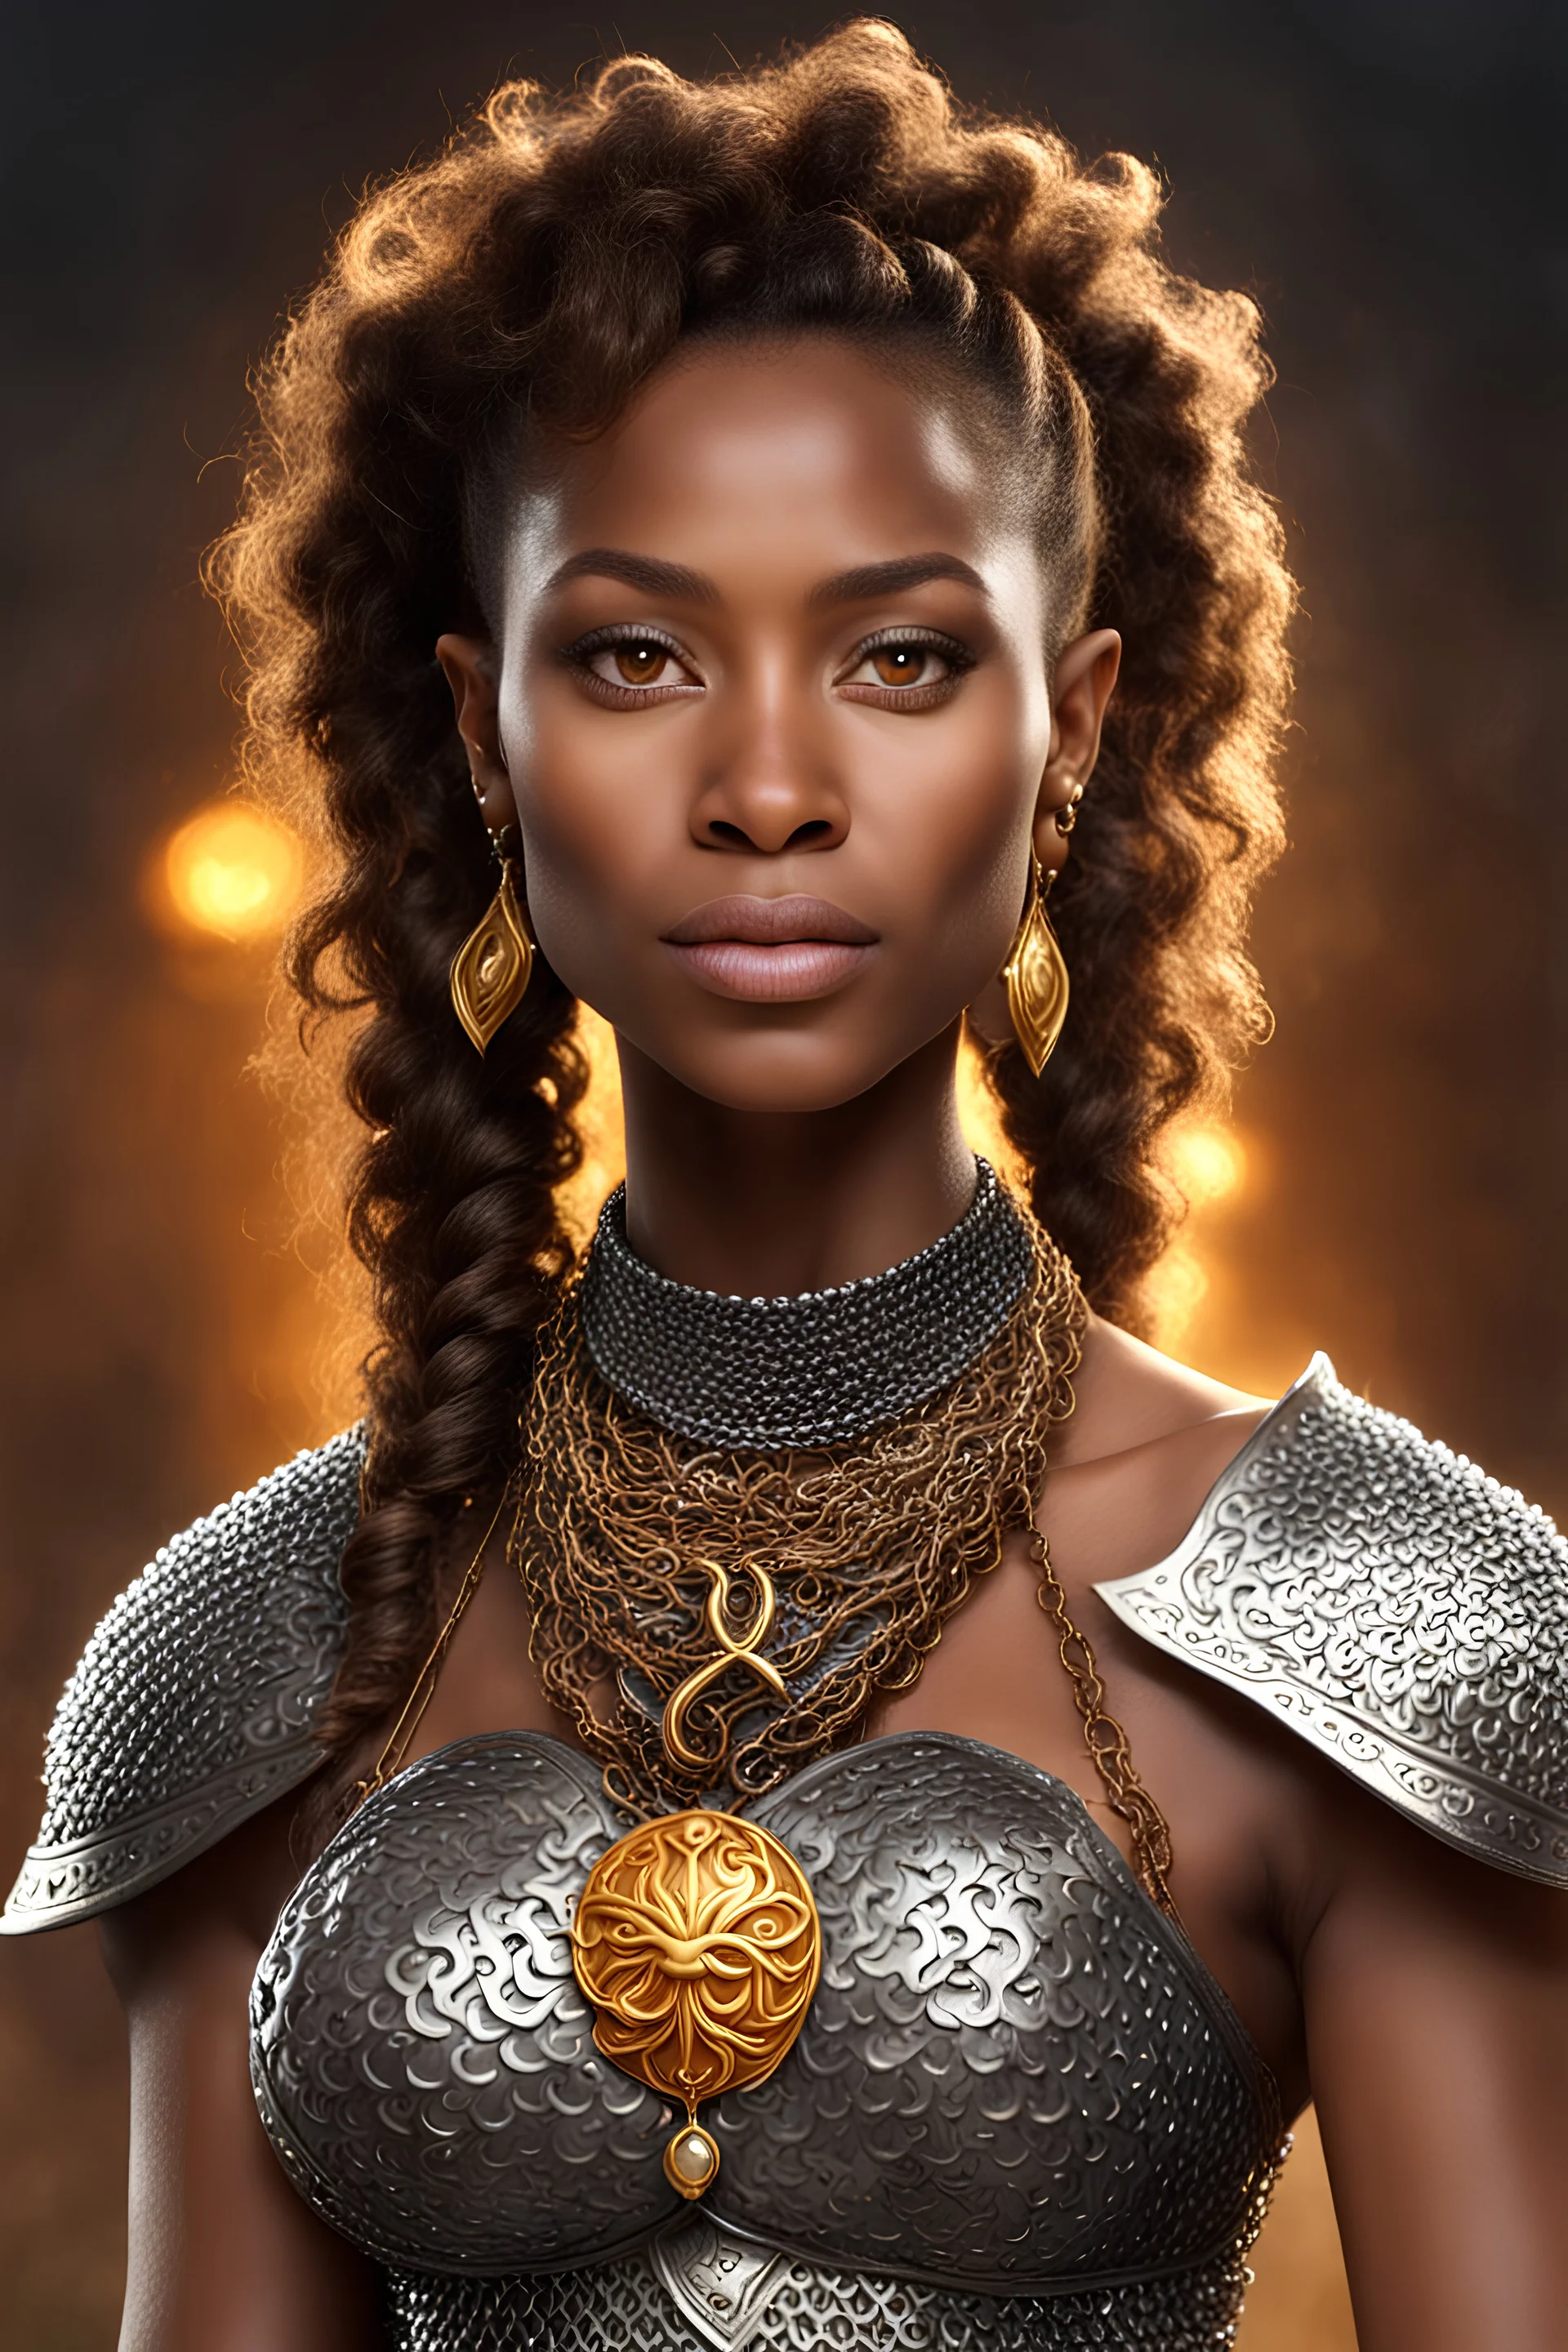 38 years old black woman, elf, brown color eyes, brown small puffy curly ponytail, wears chainmail, necklase with a symbol of sun, no earings